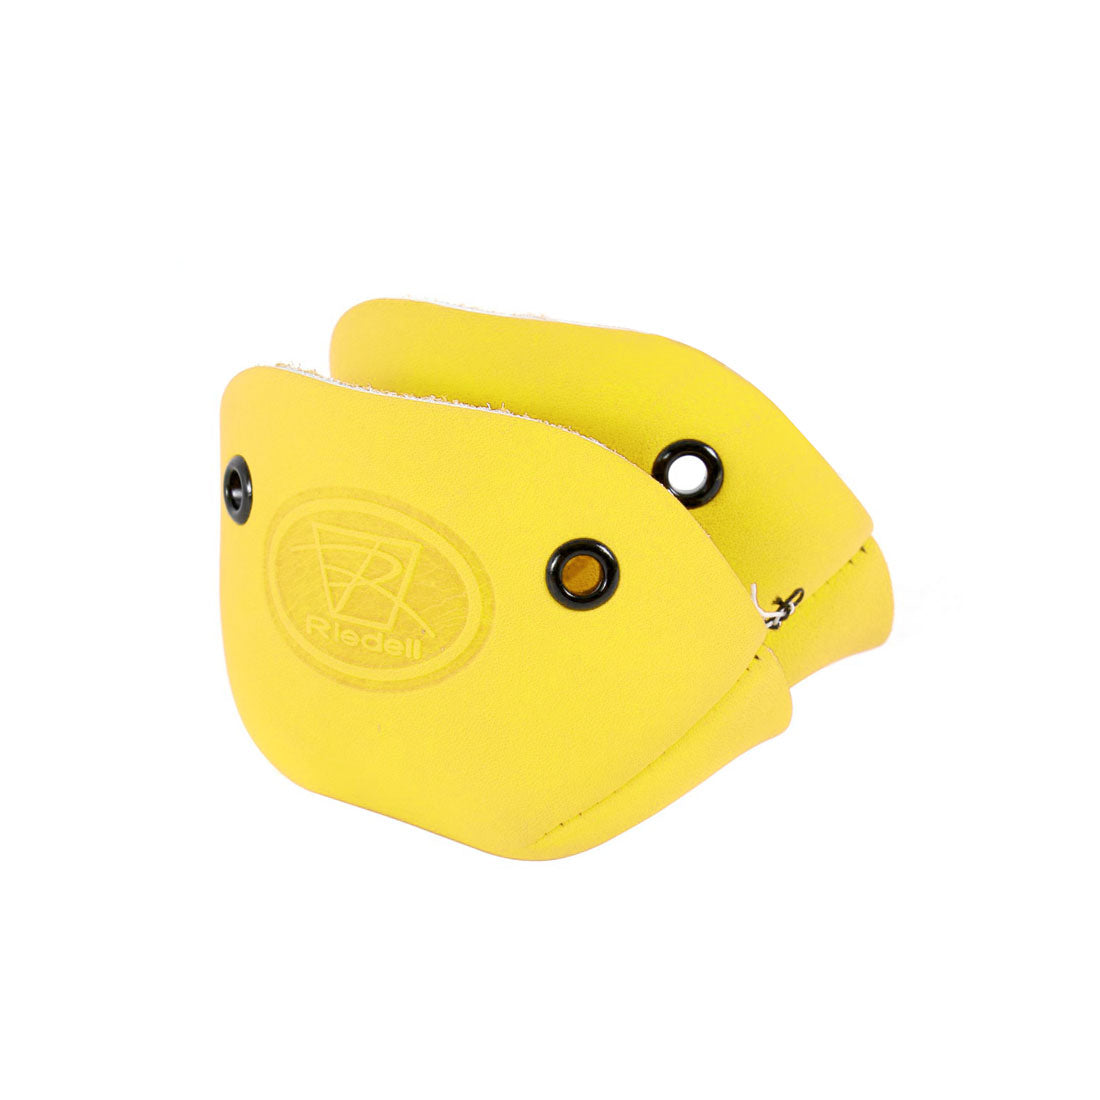 Riedell Toe Cap 2pk - Leather Yellow Roller Skate Hardware and Parts